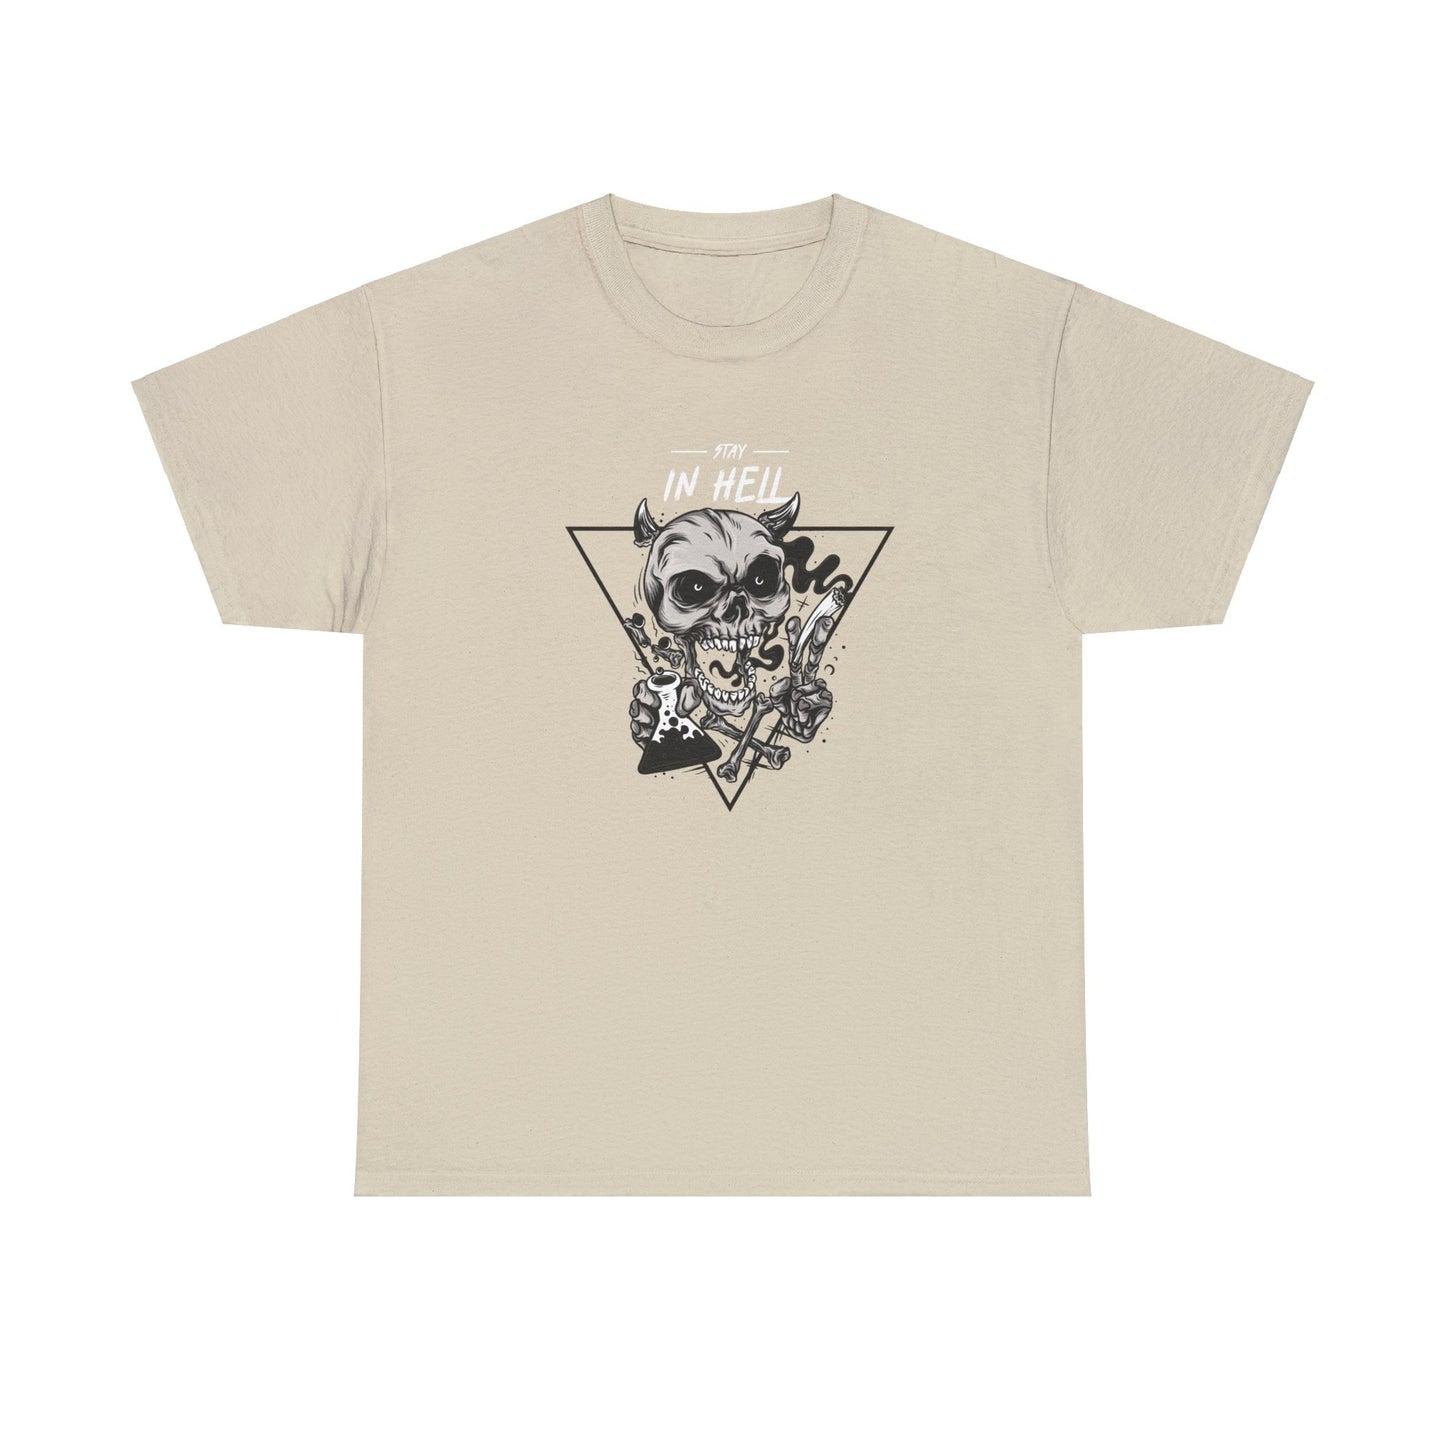 Stay In Hell Skull Sand Unisex Heavy Cotton T-Shirt - Articalist.com